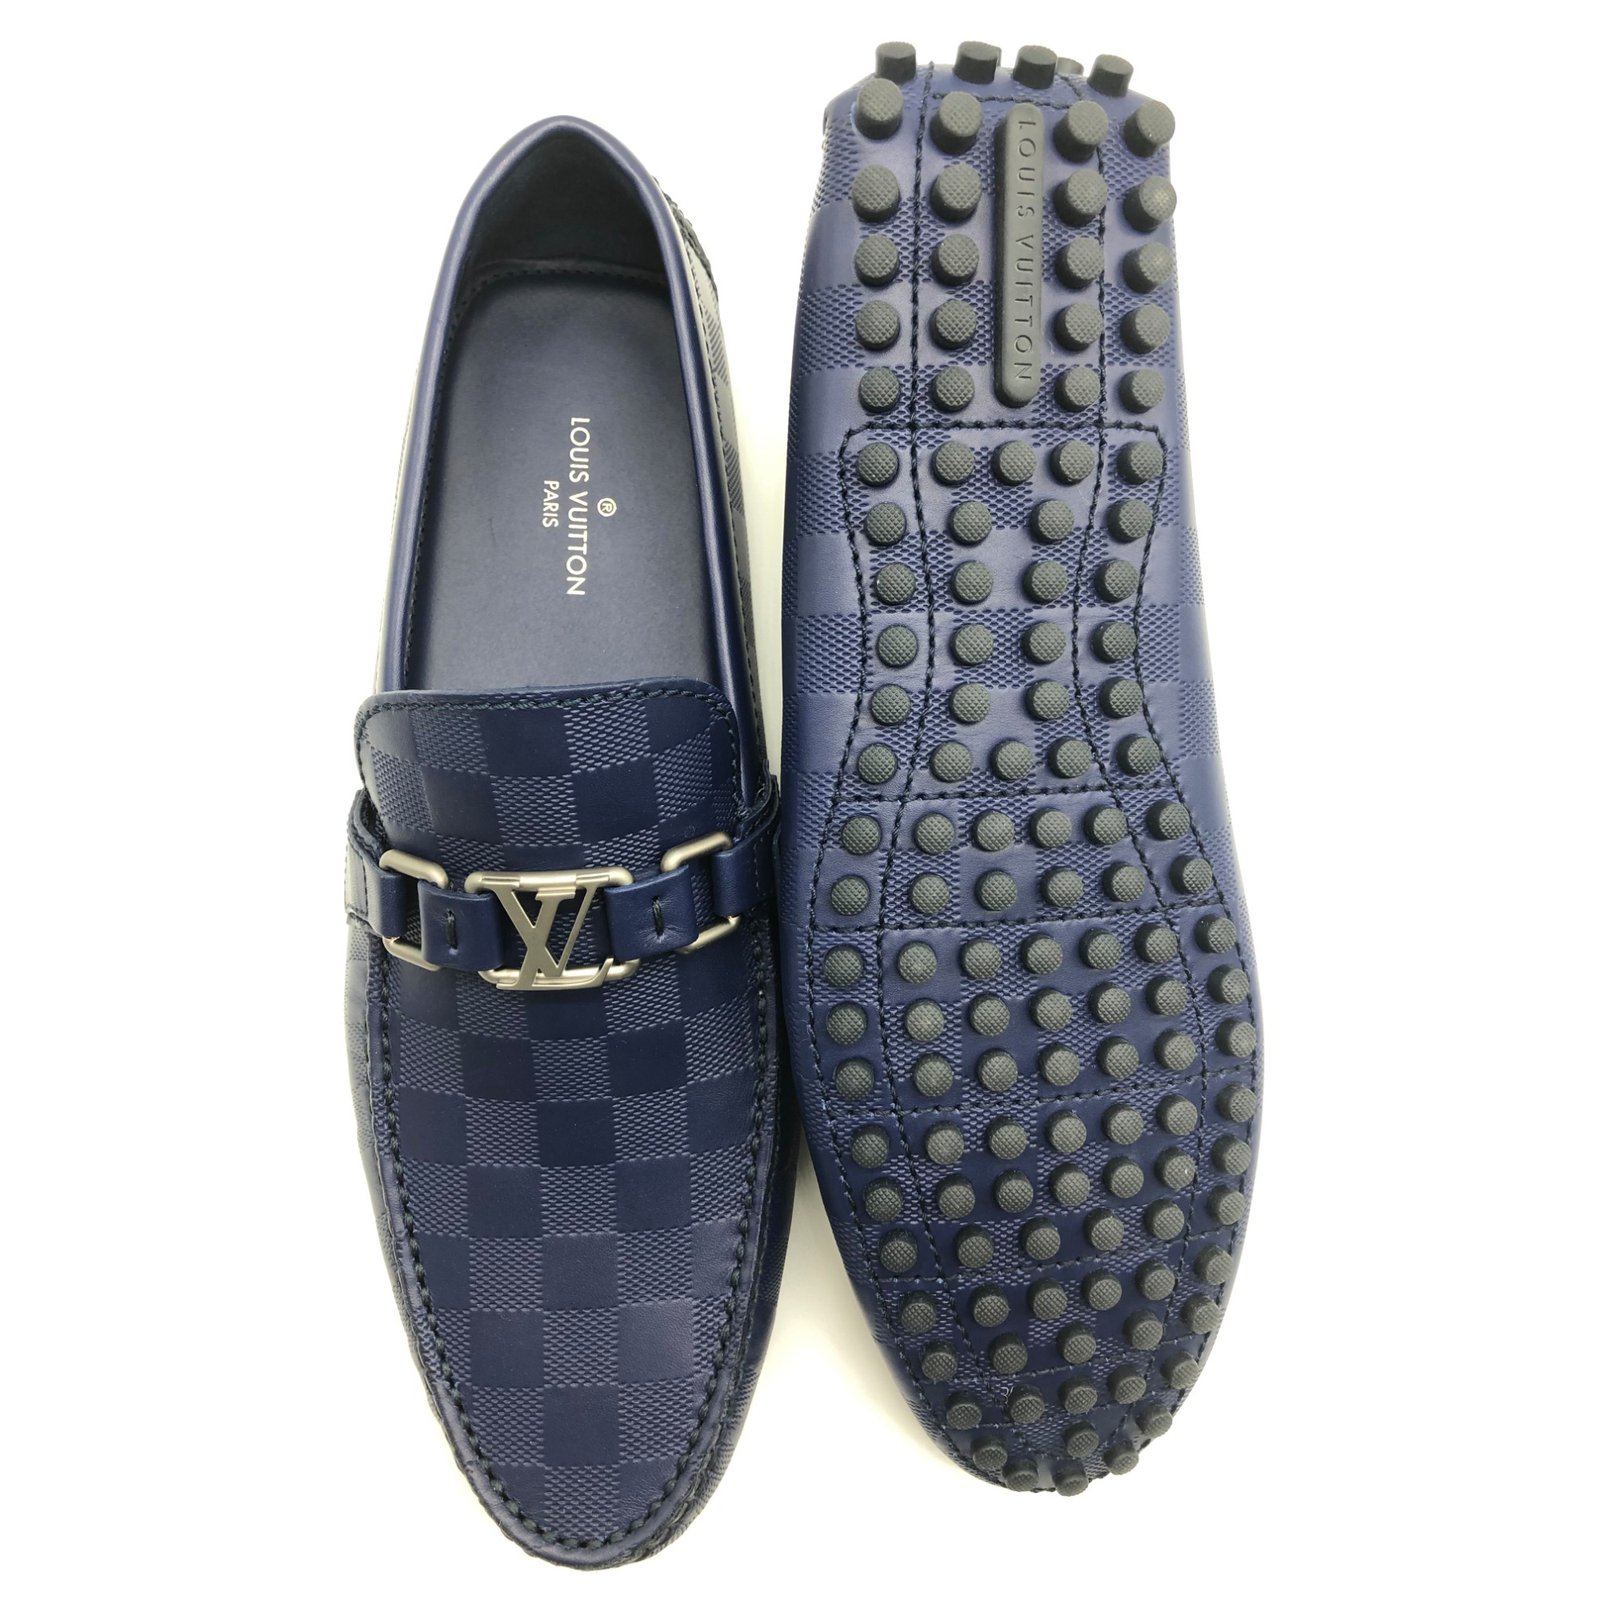 Hockenheim leather flats Louis Vuitton Blue size 13 US in Leather - 29249410